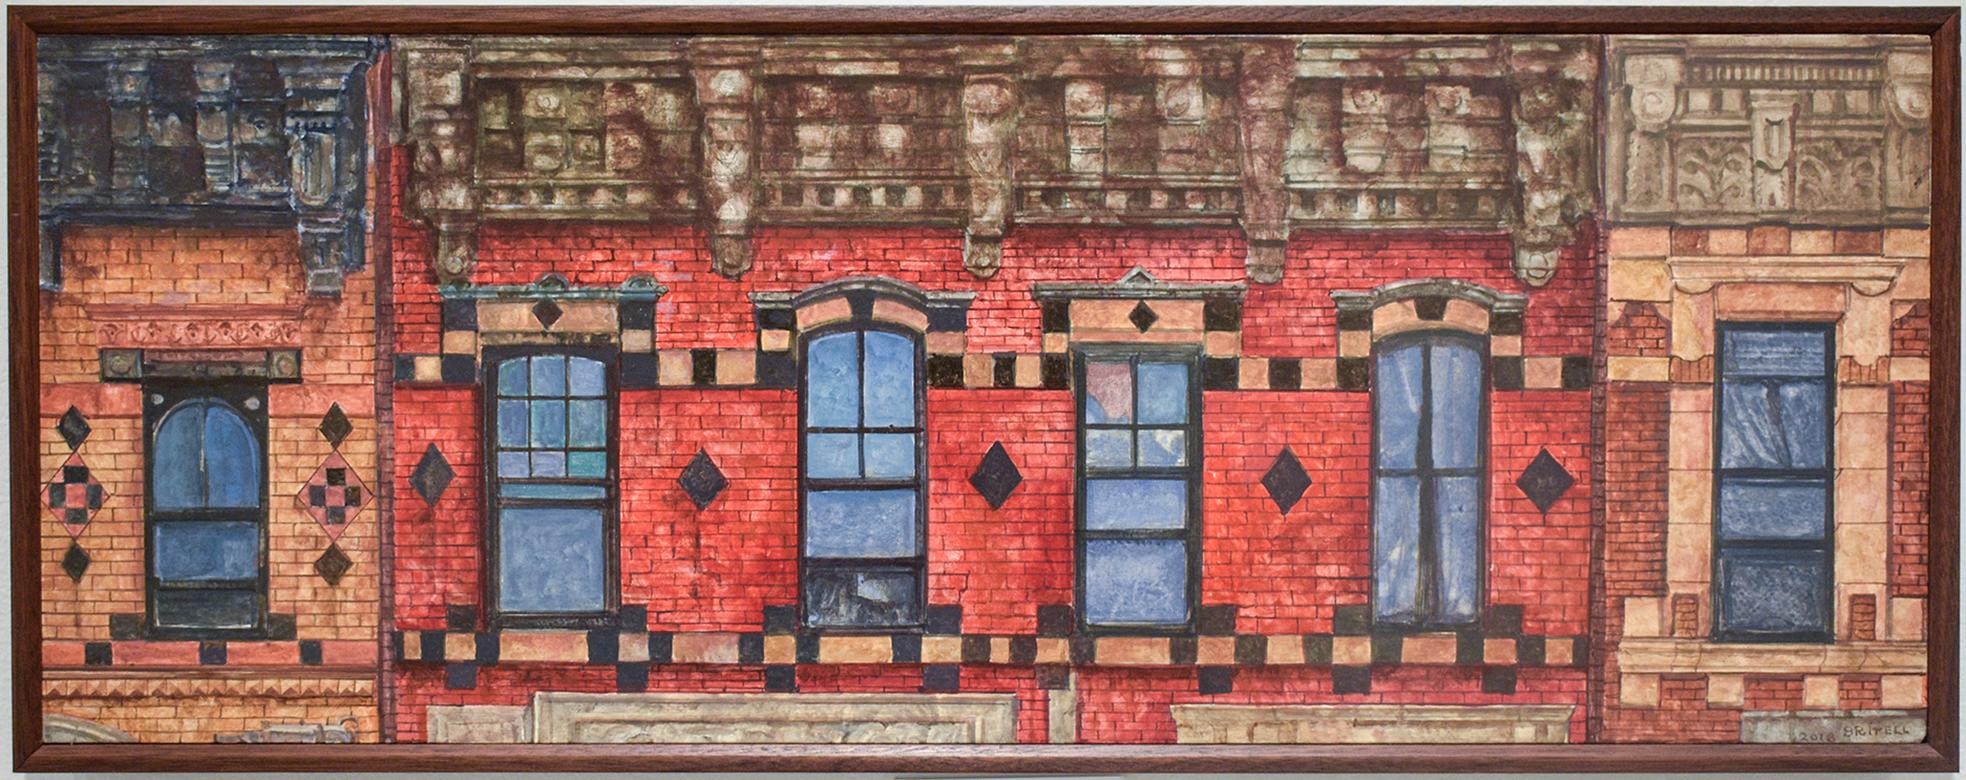 Six Windows, Myrtle Ave (Photo-Realist Oil Painting of Classic NYC Red Building)